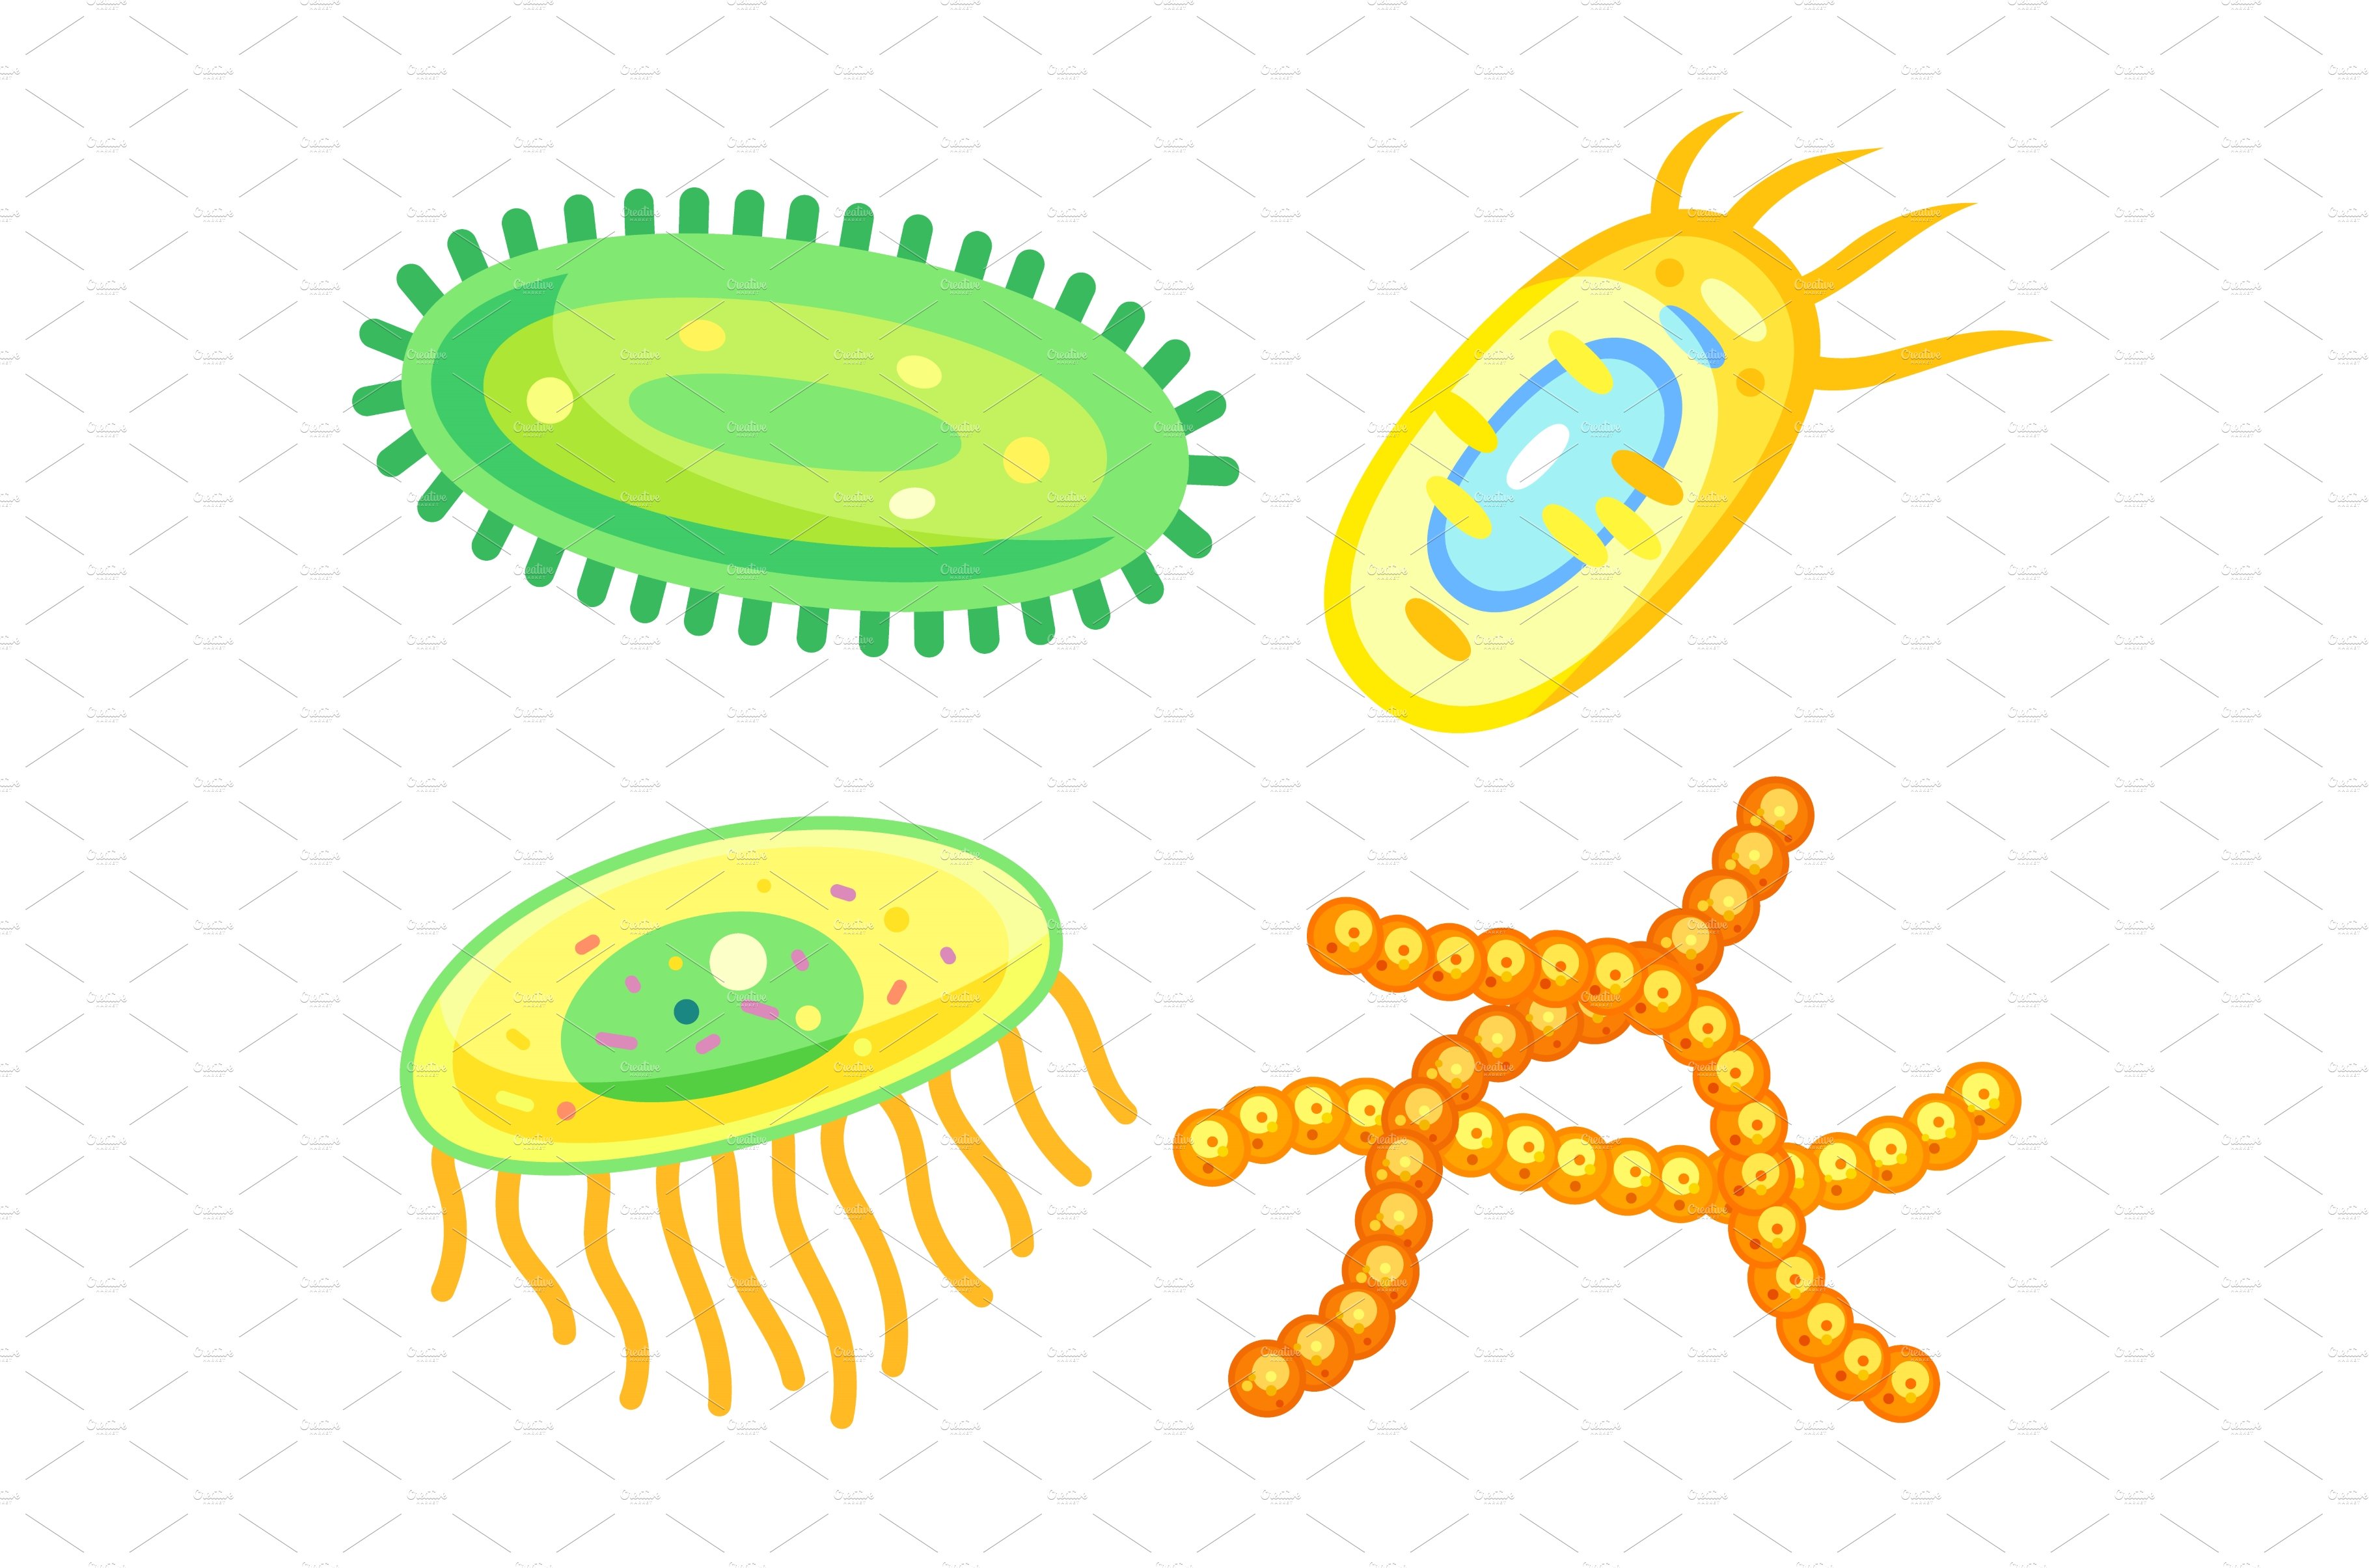 Bacteria and germs cells, microbes cover image.